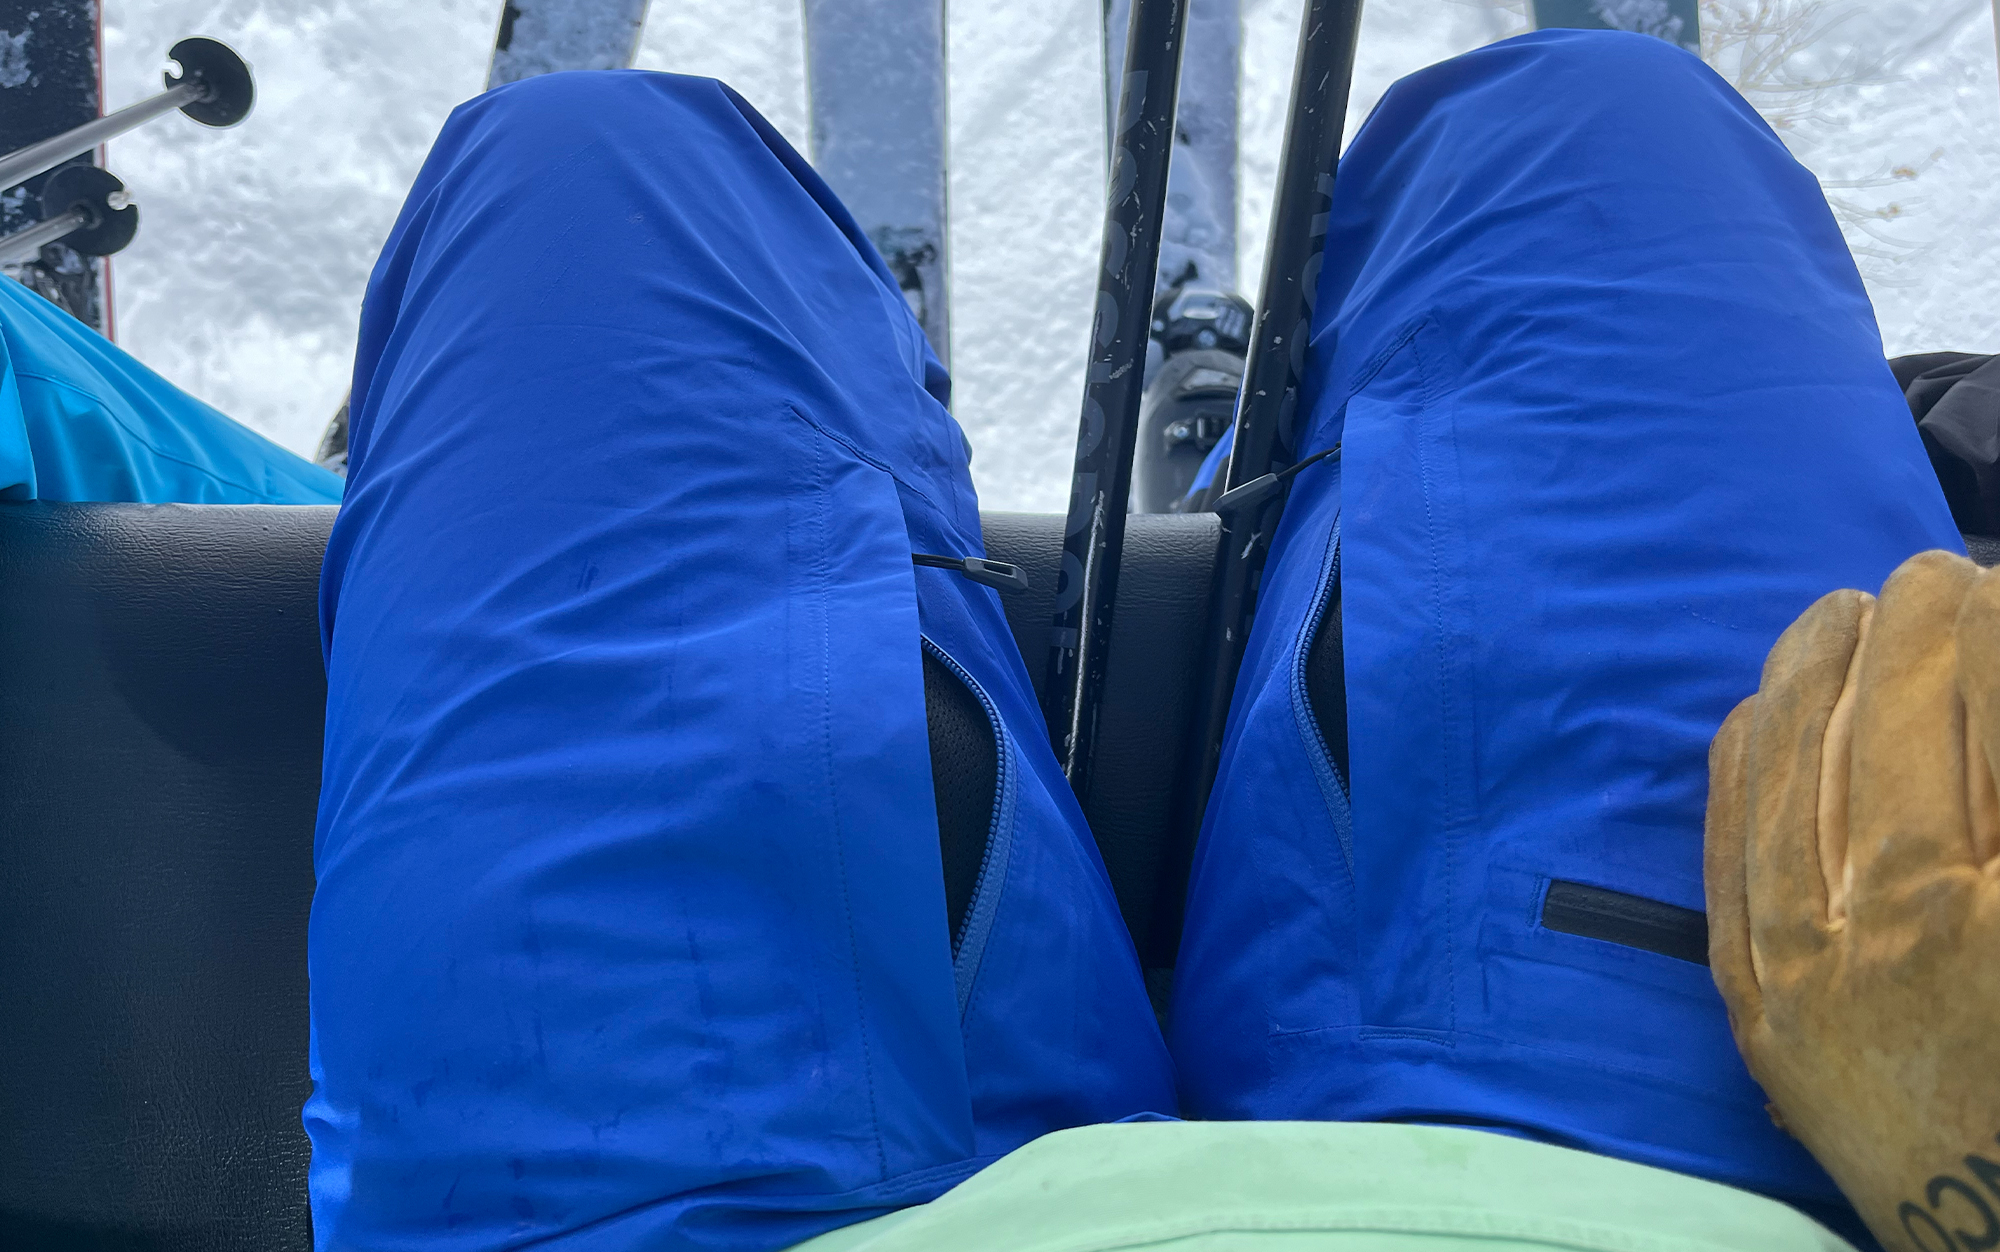 The vents are located inside the thighs on these pants to keep snow out.